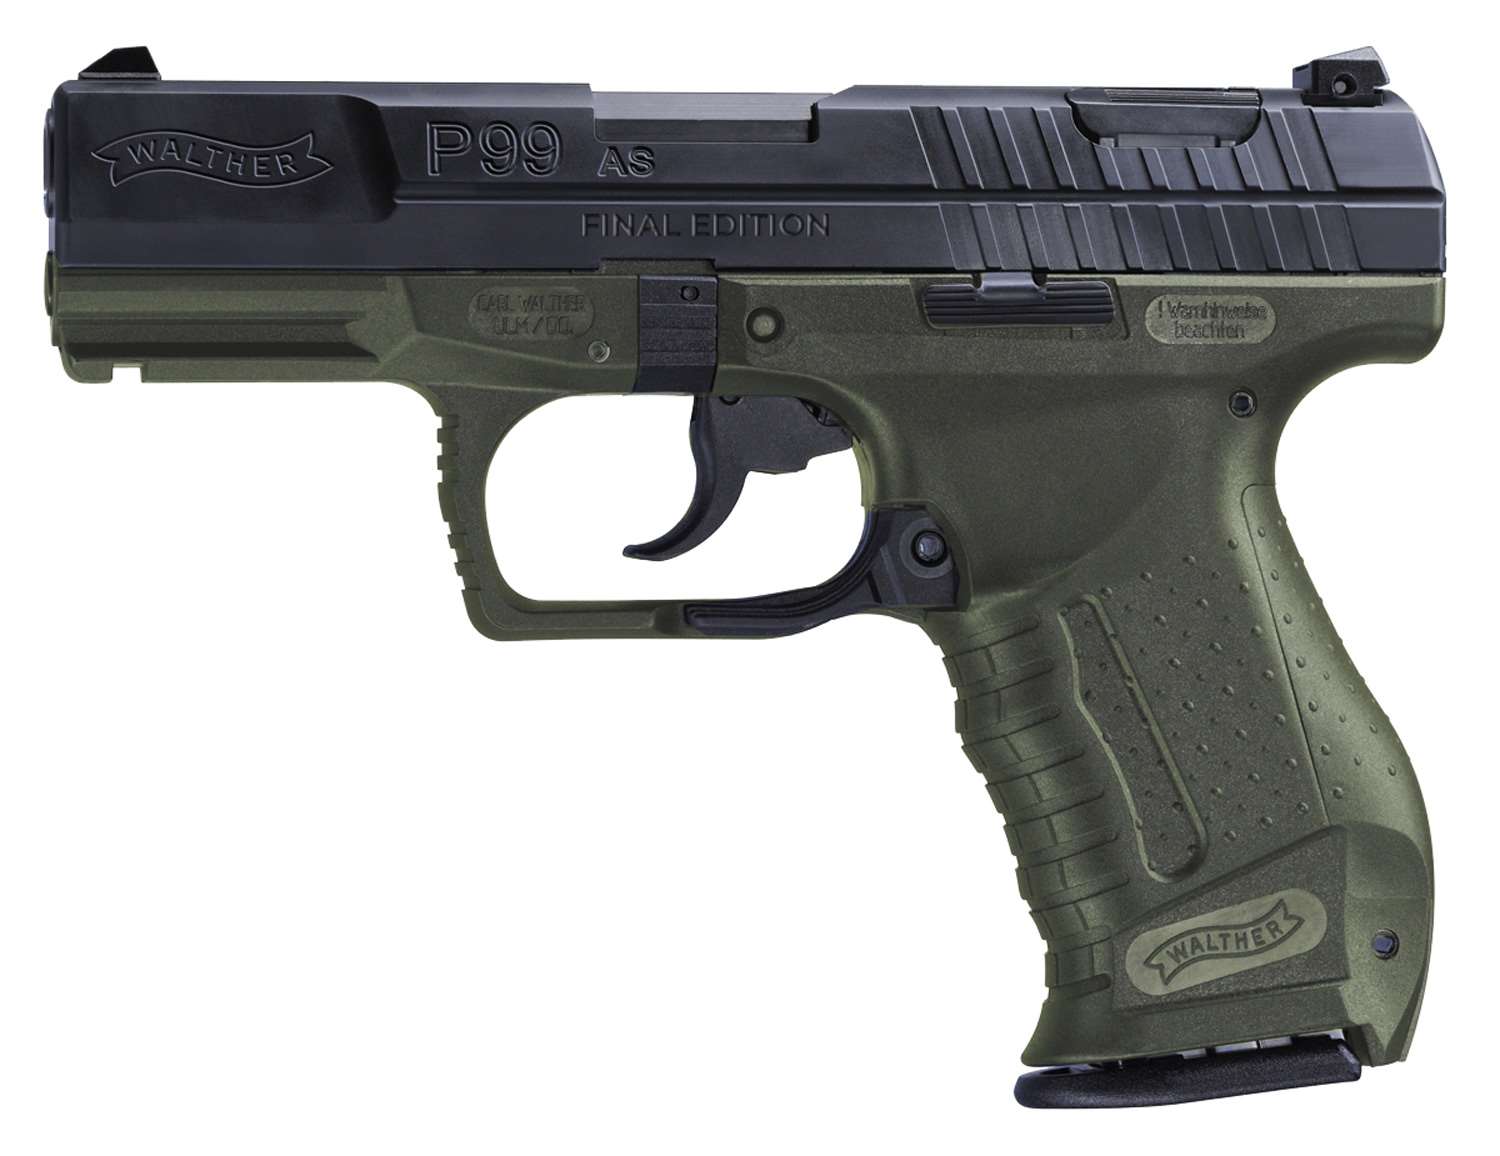 WALTHER P99 AS – FINAL EDITION